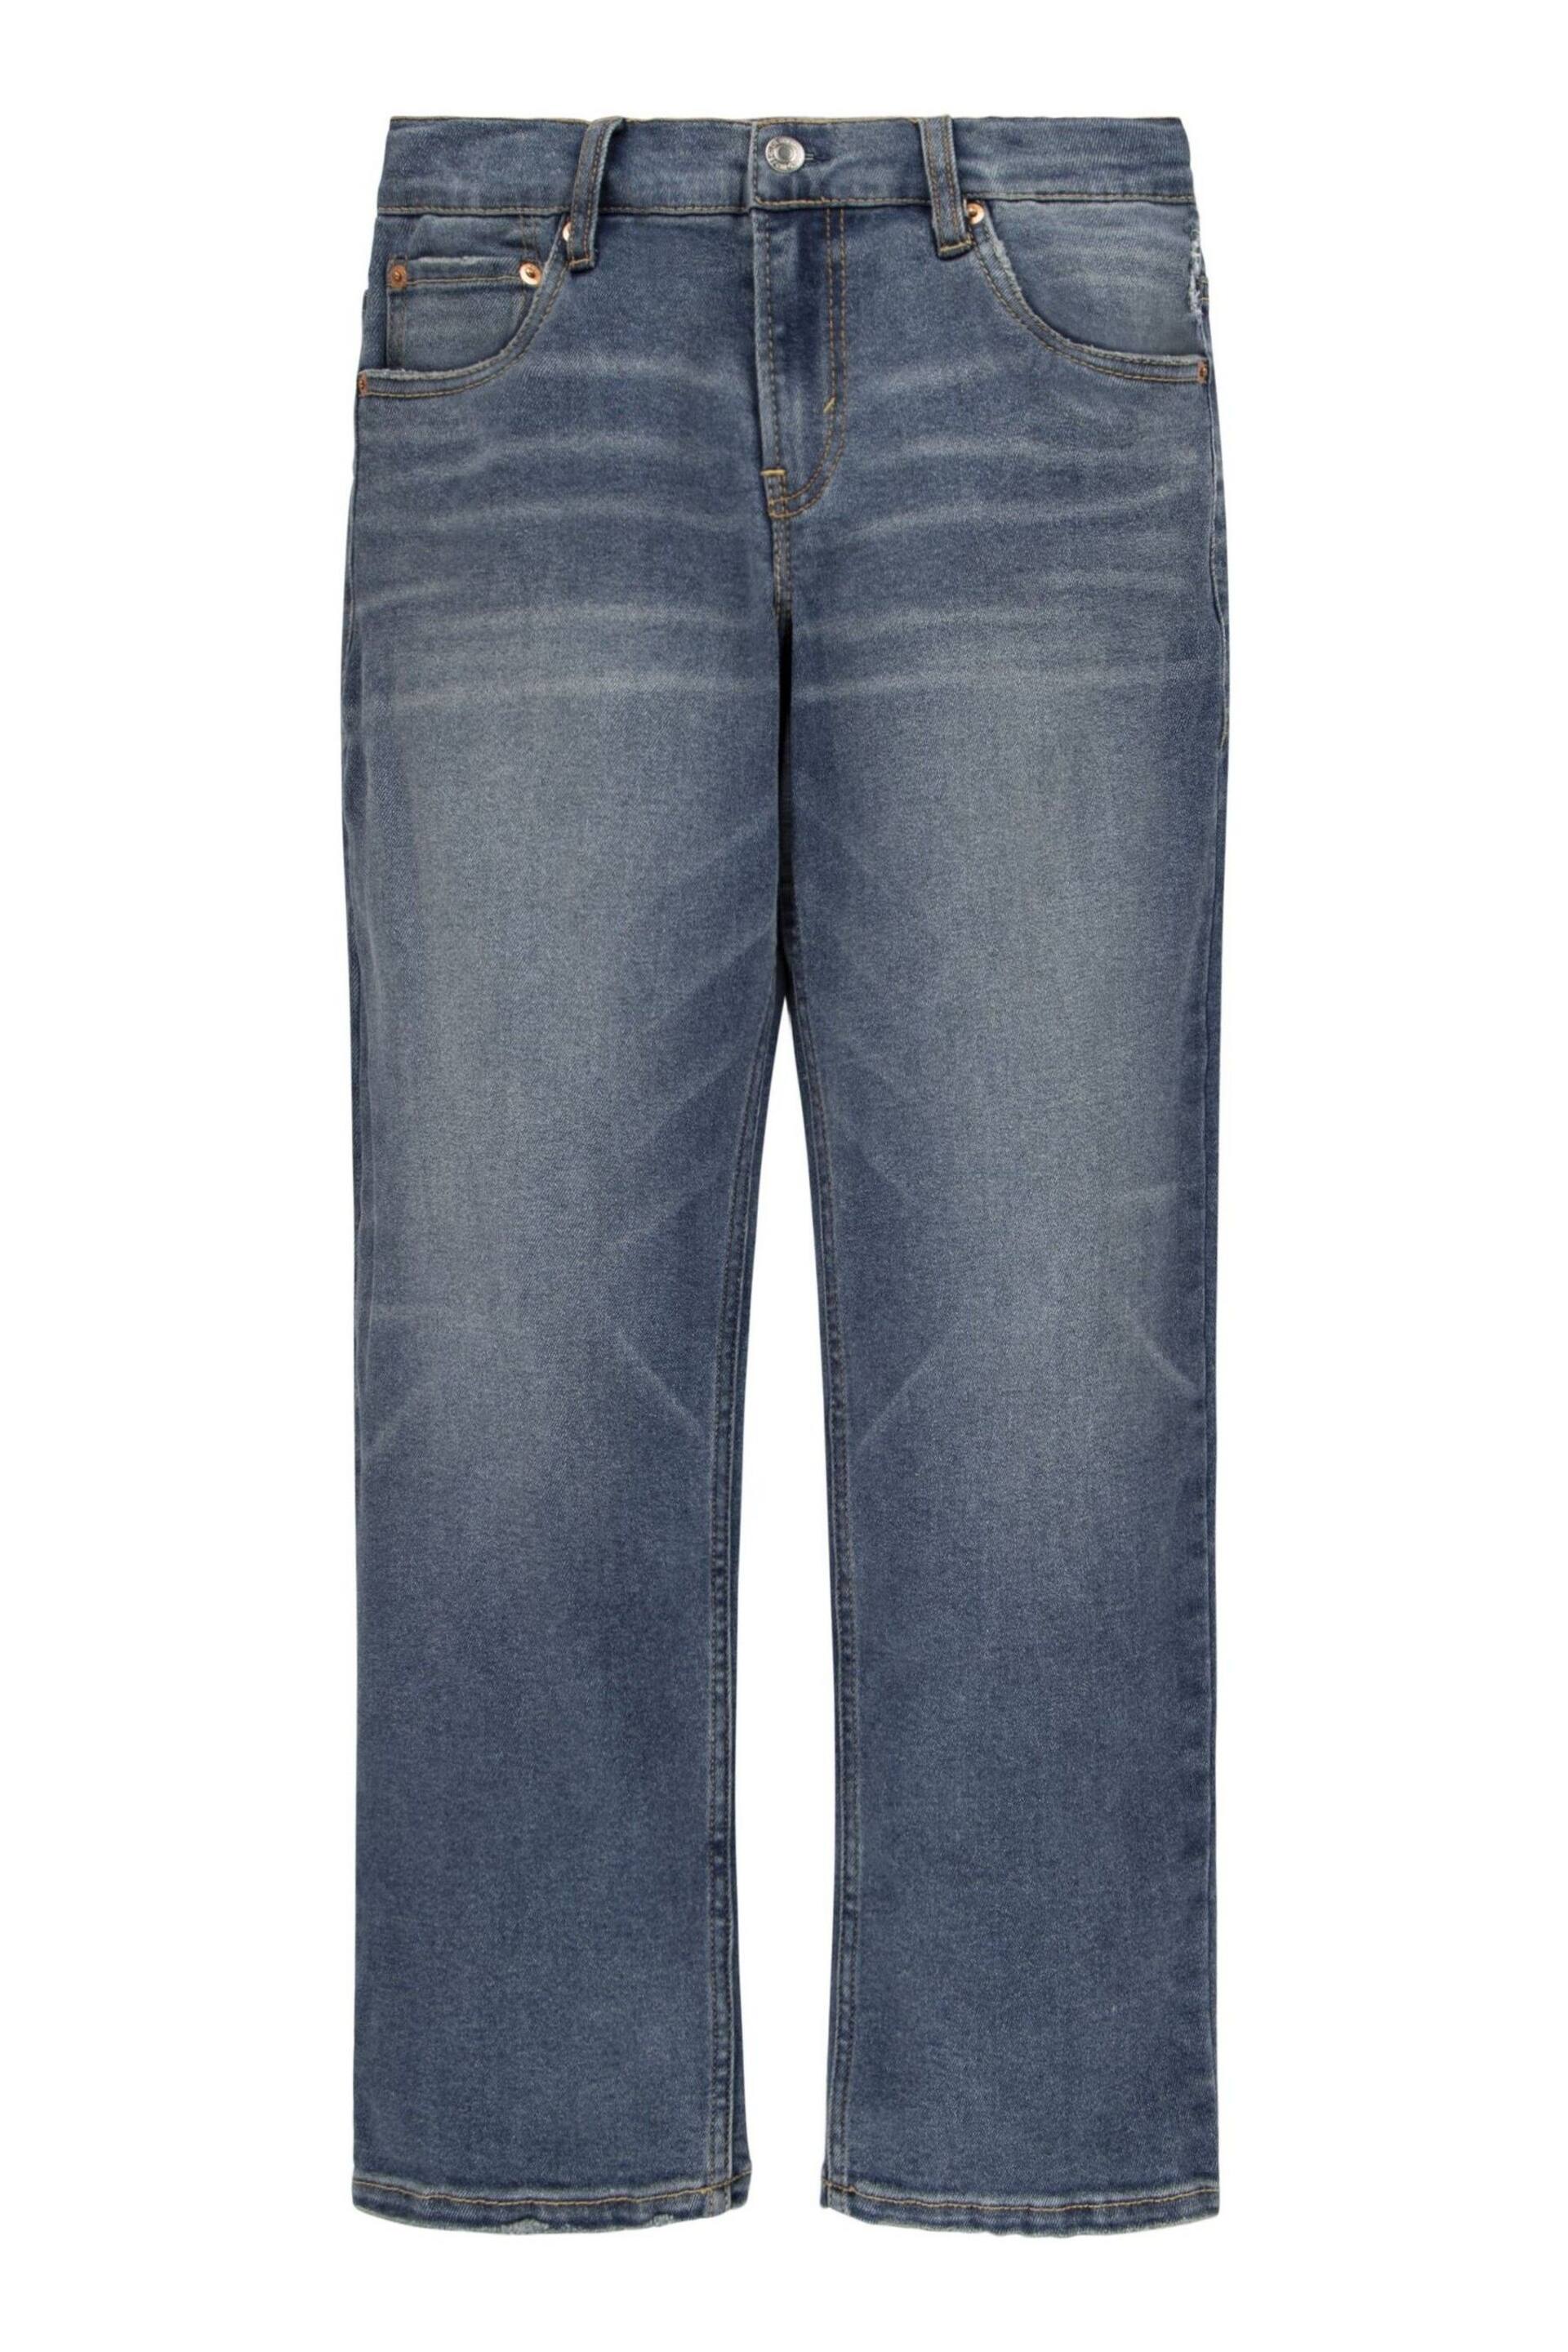 Levi's® Light Blue Stay Loose Taper Jeans - Image 1 of 5